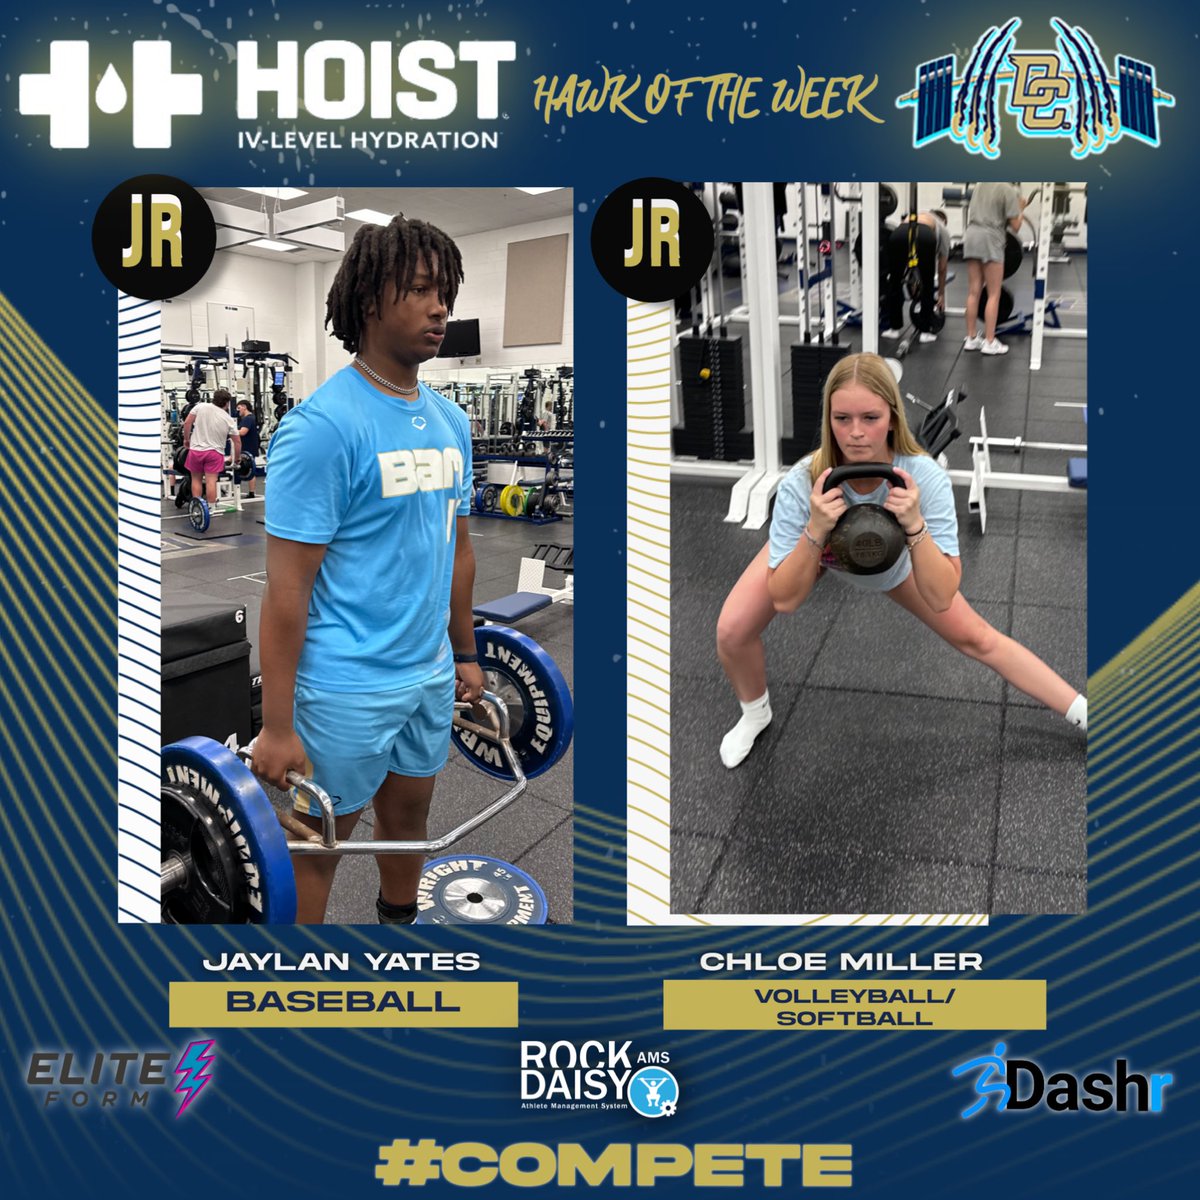 🚨 SHOUTOUT OF THE WEEK 🚨 
——————————————————
Thanks to Hoist, our Hoist Hawk Shoutout of the Week goes to Juniors, Jaylan Yates and Chloe Miller. 

#DecaturProud #HulkHawks #Compete #Hawkamania #personalbest